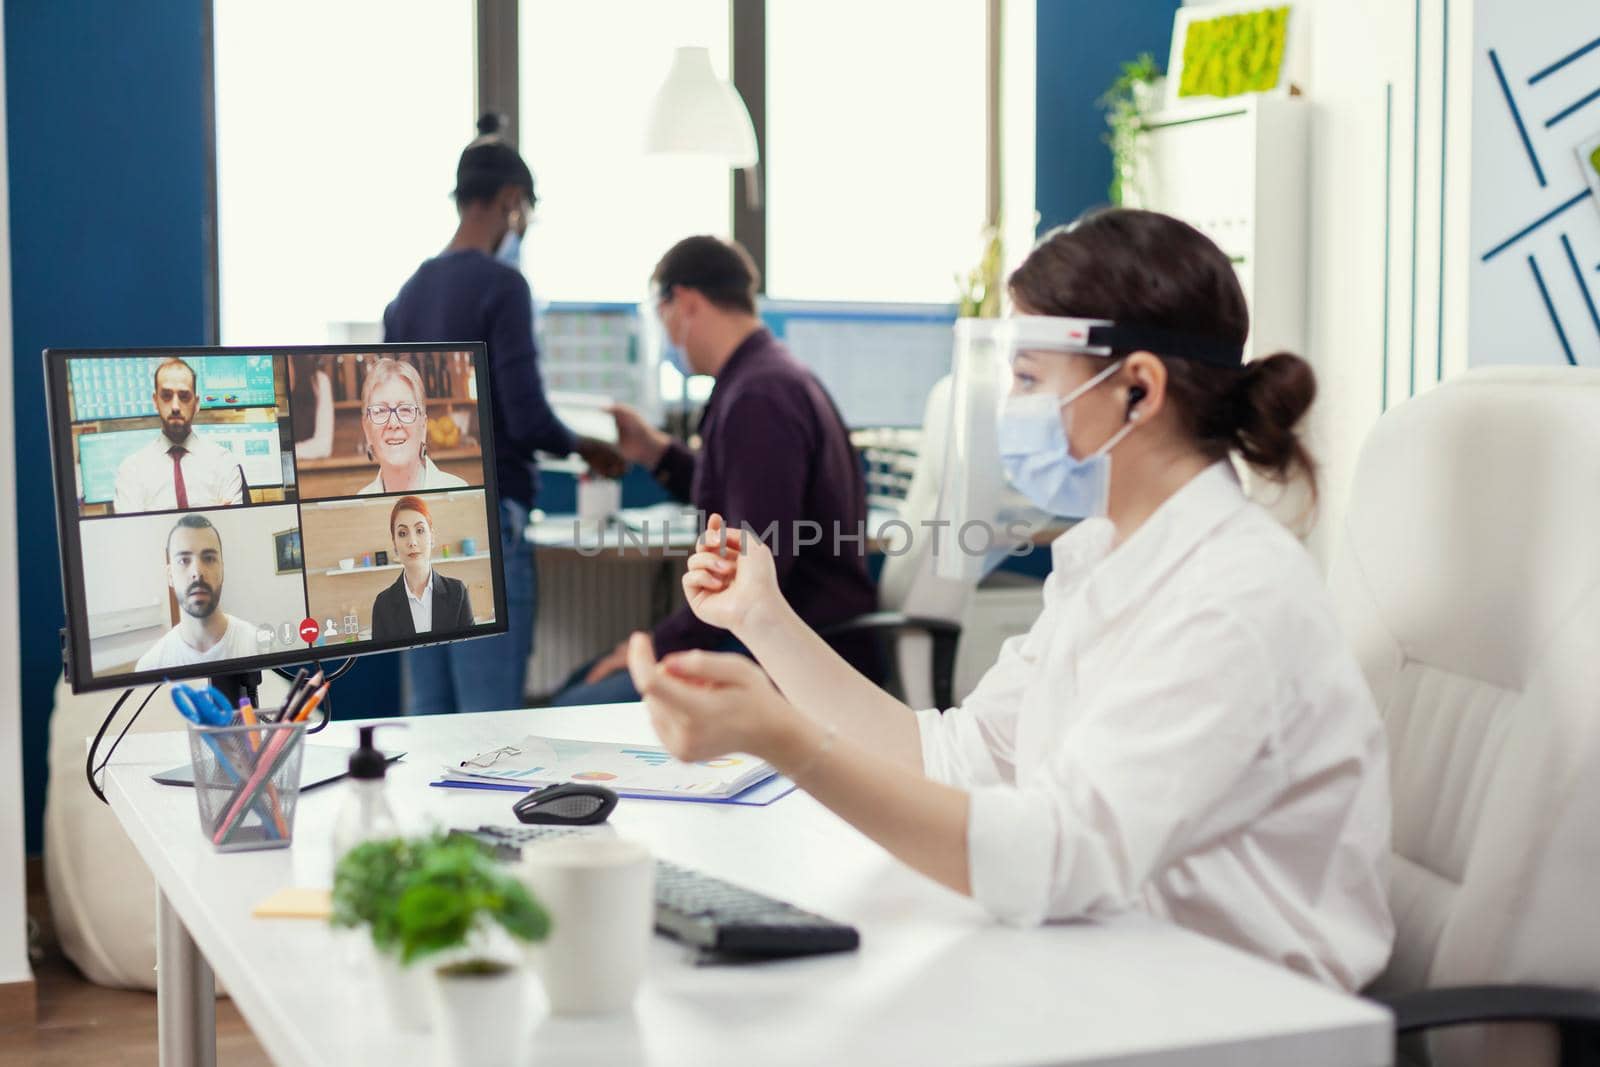 Businesswoman listening businesspeople during online conference on computer at workplace and wearing face mask. Entrepreneur having videocall while colleagues working respecting social distance during global pandemic.